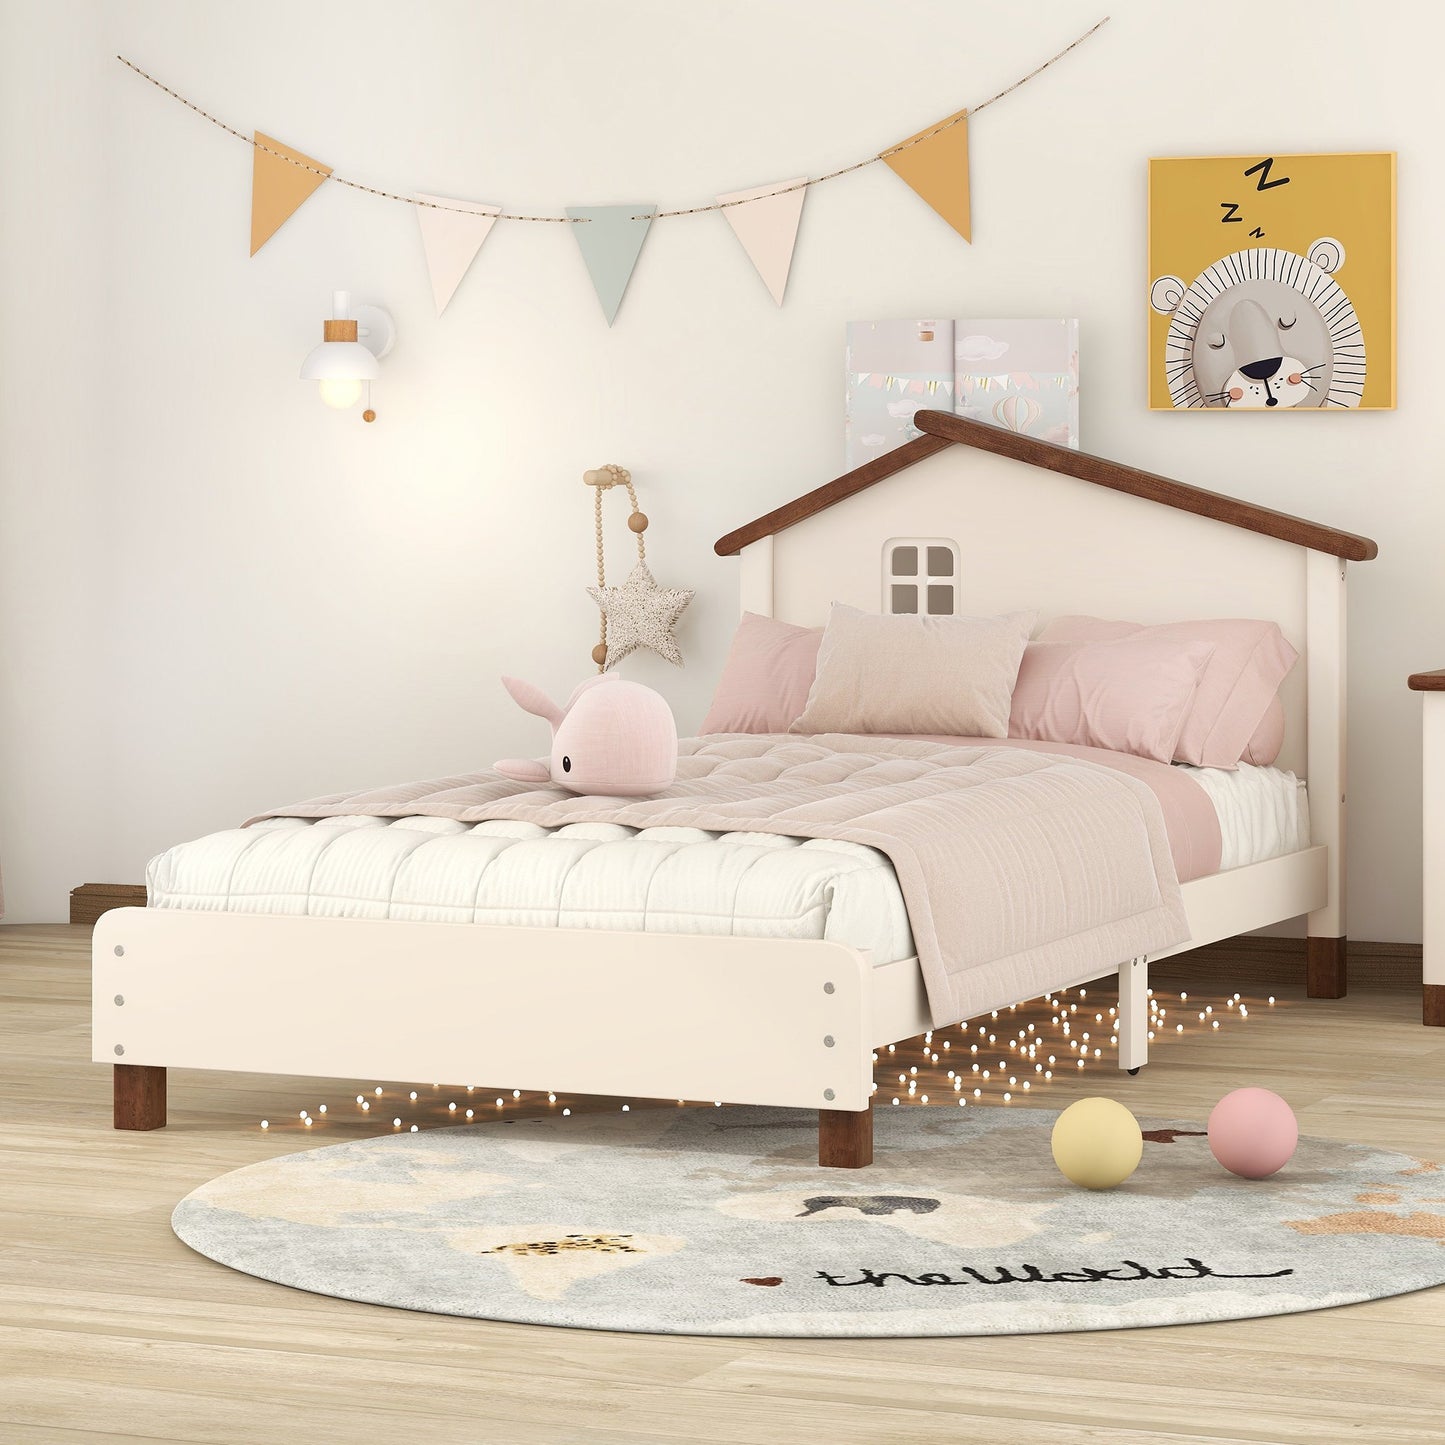 Gewnee Twin Size Wood Platform Bed with House-shaped Headboard for Child,Cream